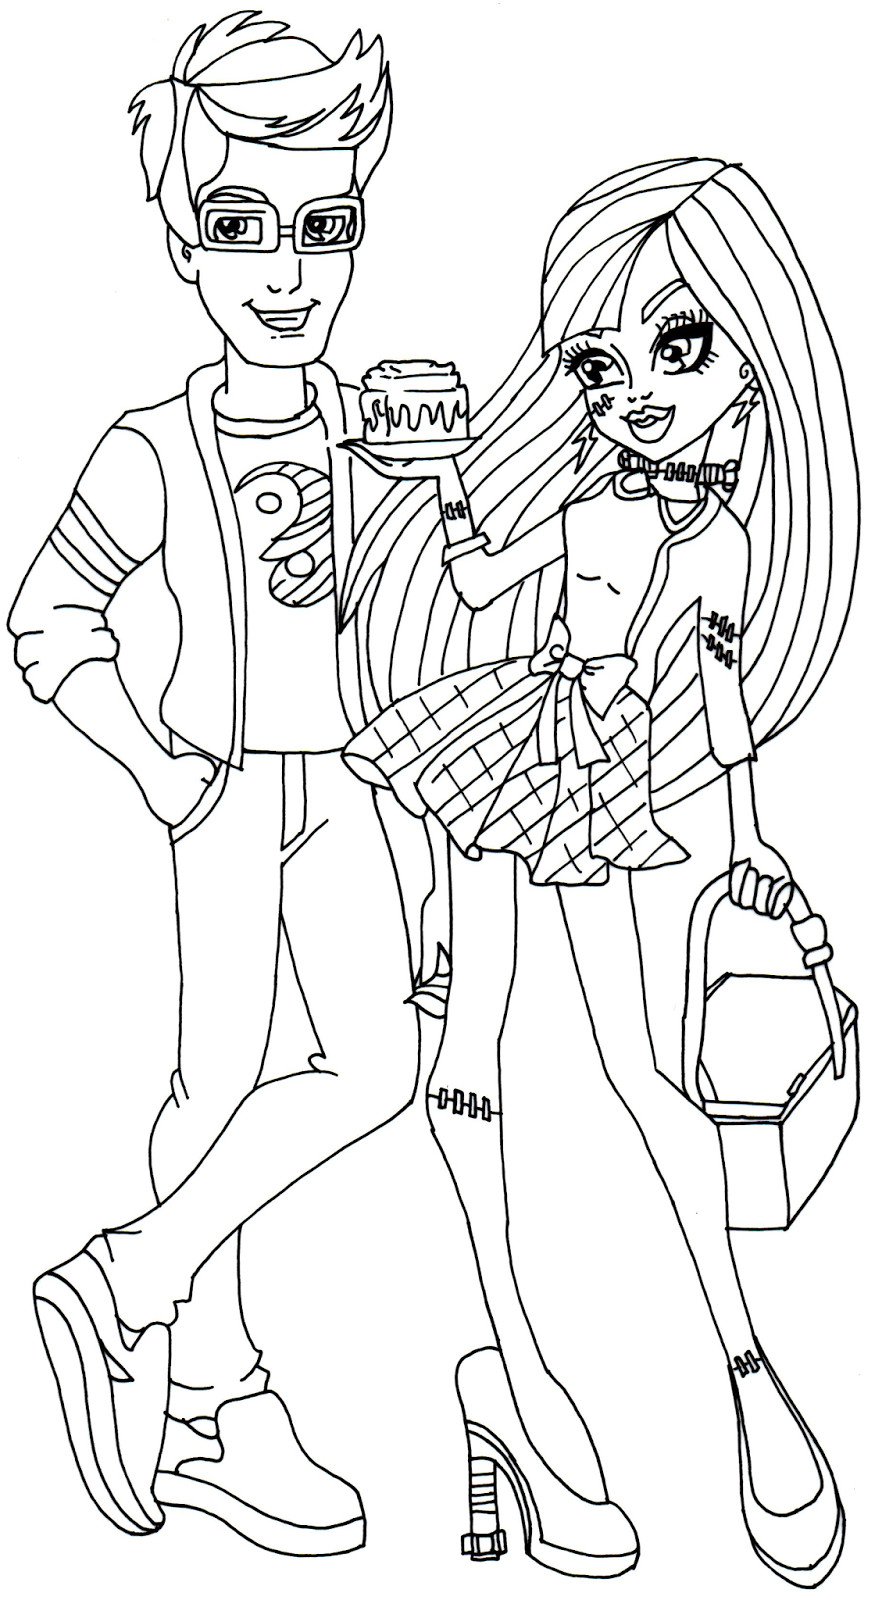 Free Printable Monster High Coloring Pages
 Free Printable Monster High Coloring Pages Picnic Casket